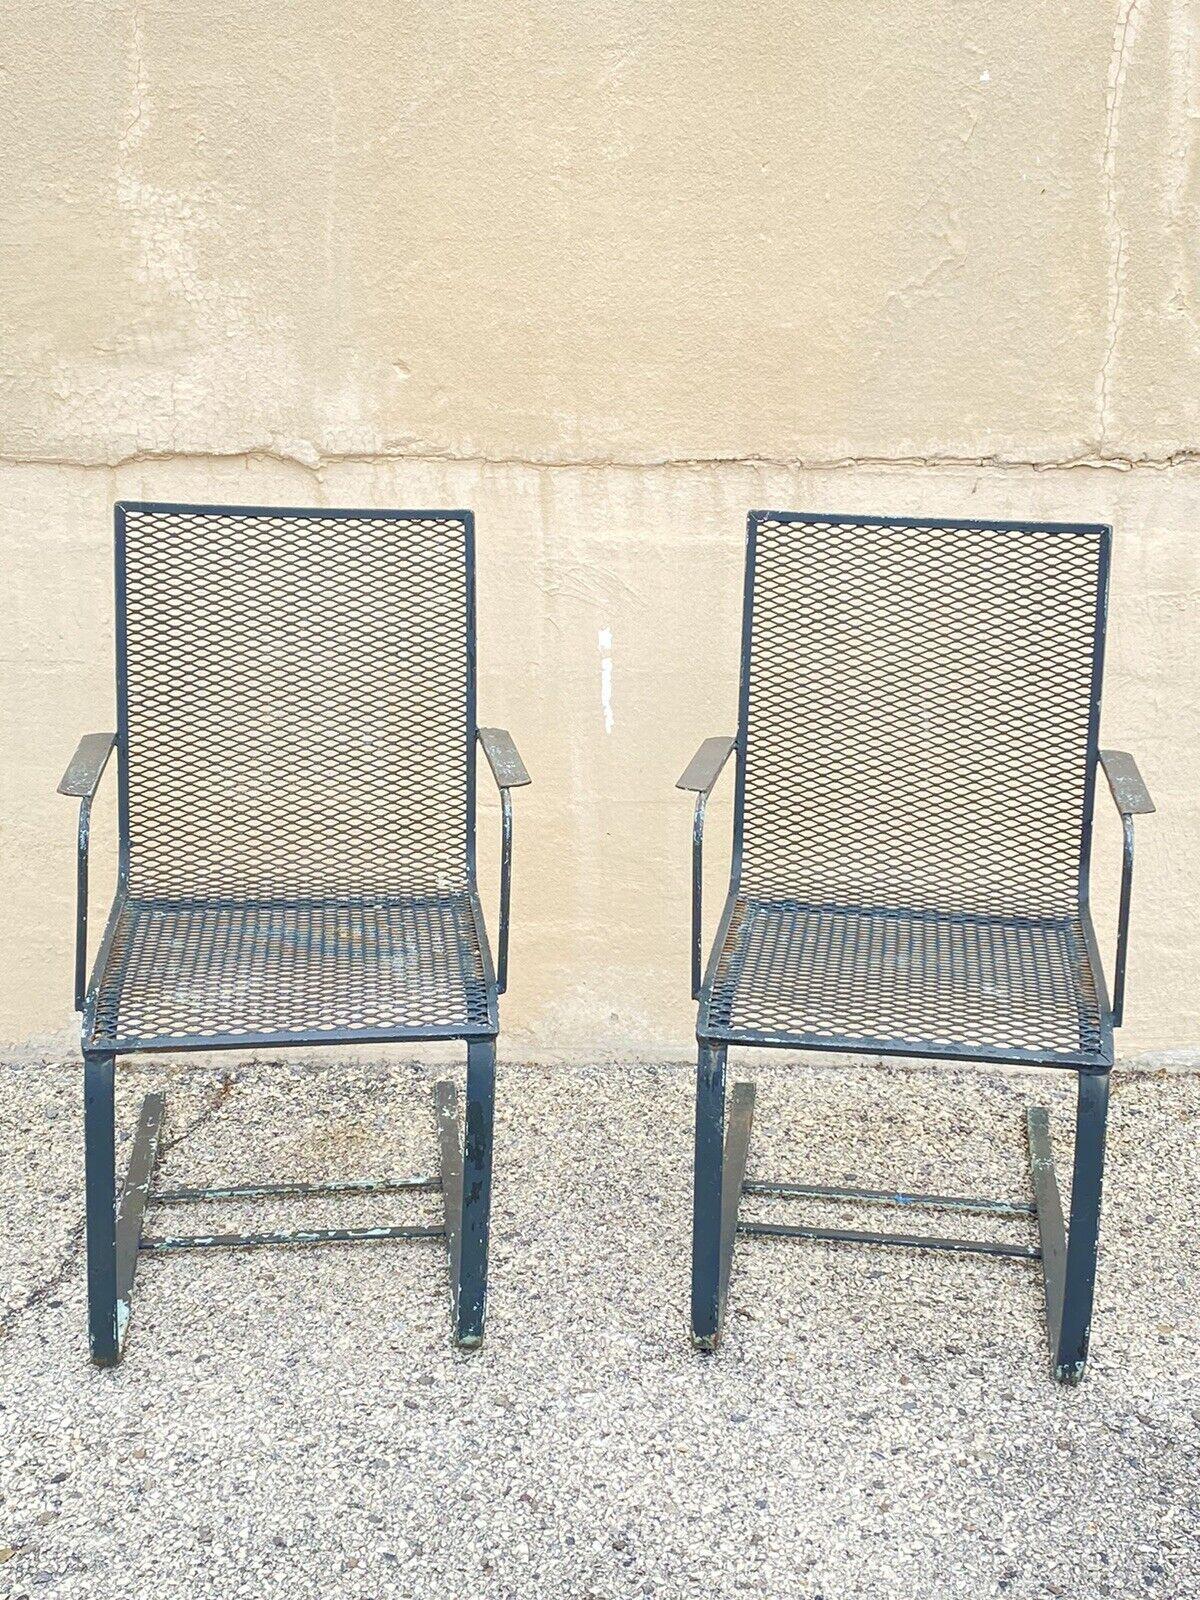 Vintage Industrial Modern Green Heavy Wrought Iron Metal Mesh Cantilever Garden Patio Chairs - a Pair. Circa Mid 20th Century
Measurements: 35.5